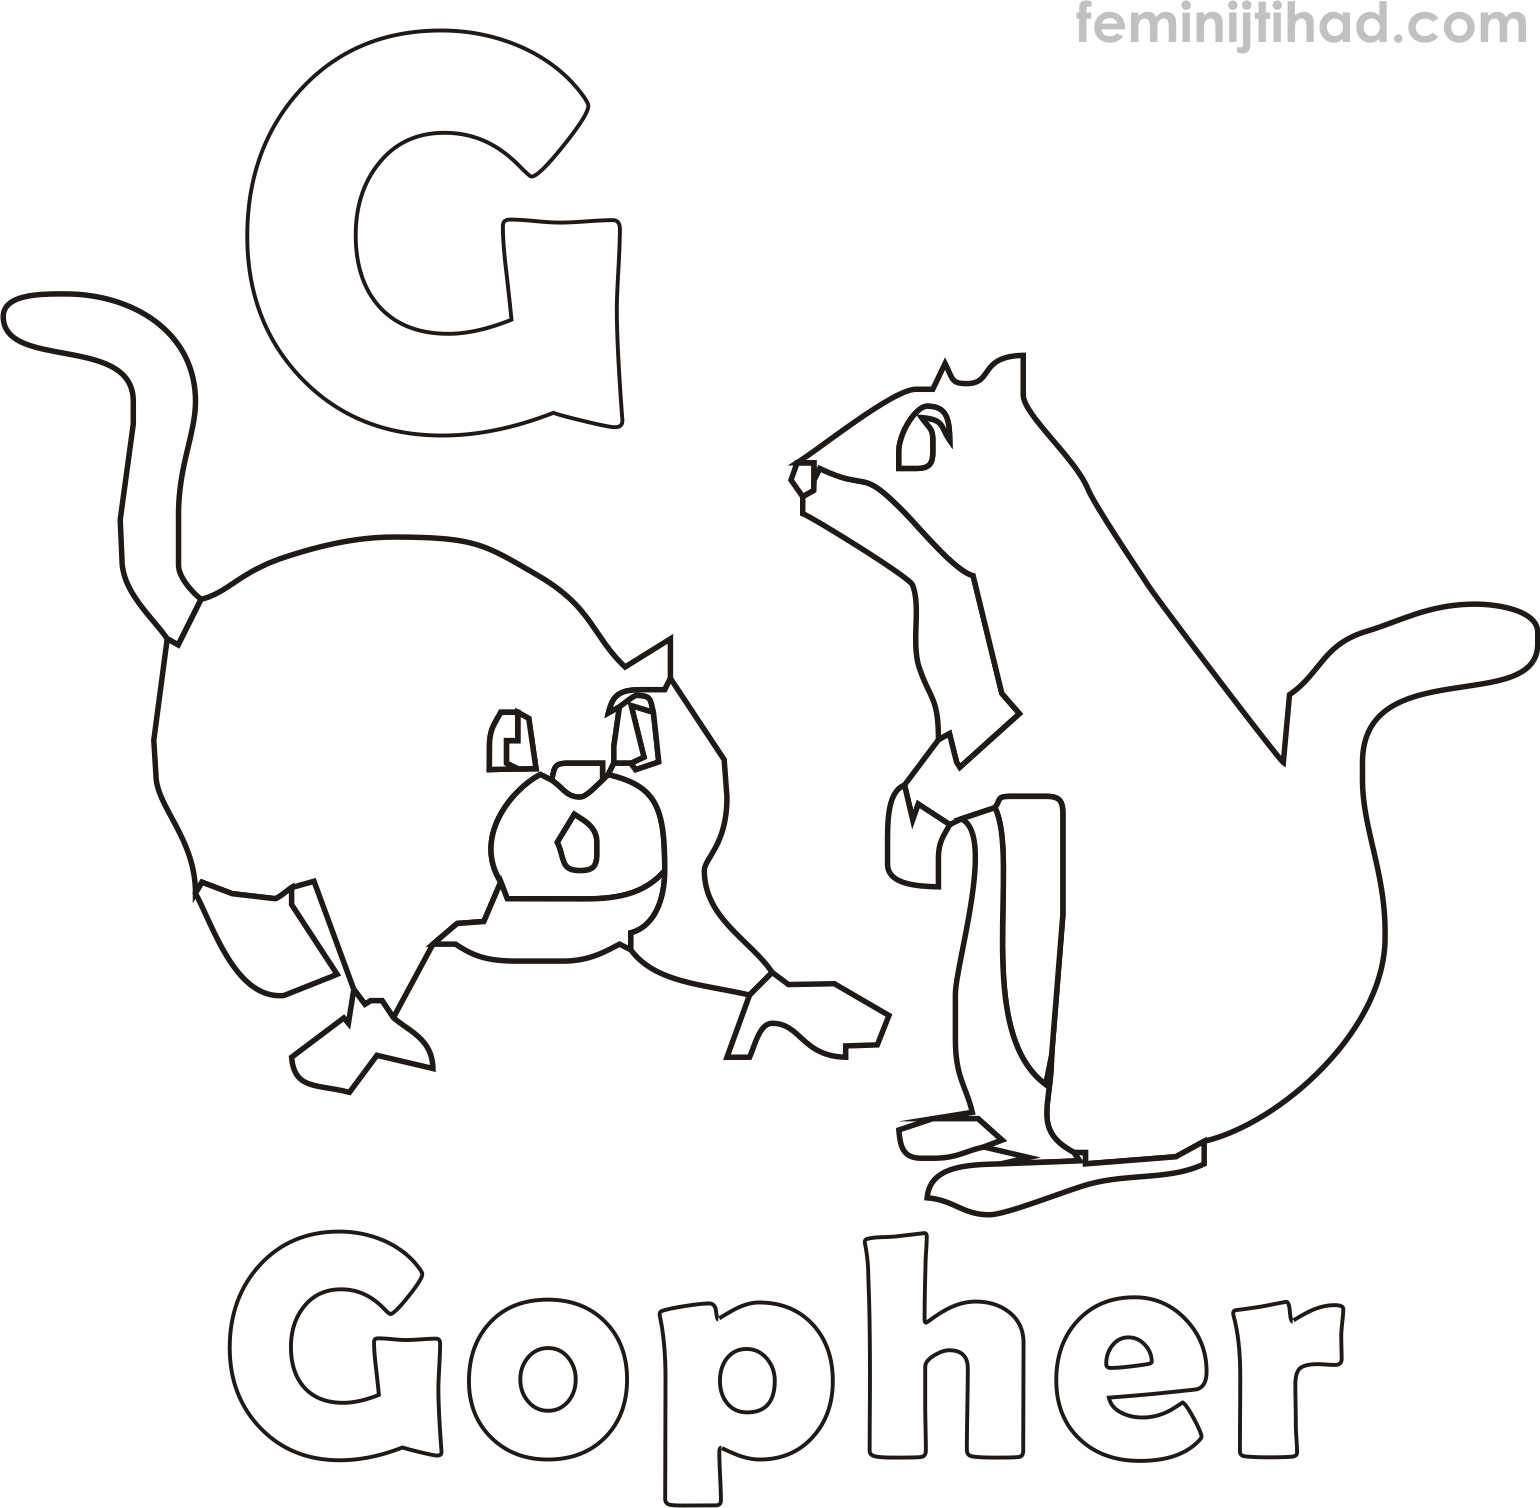 Gopher Coloring Page for Preschooler